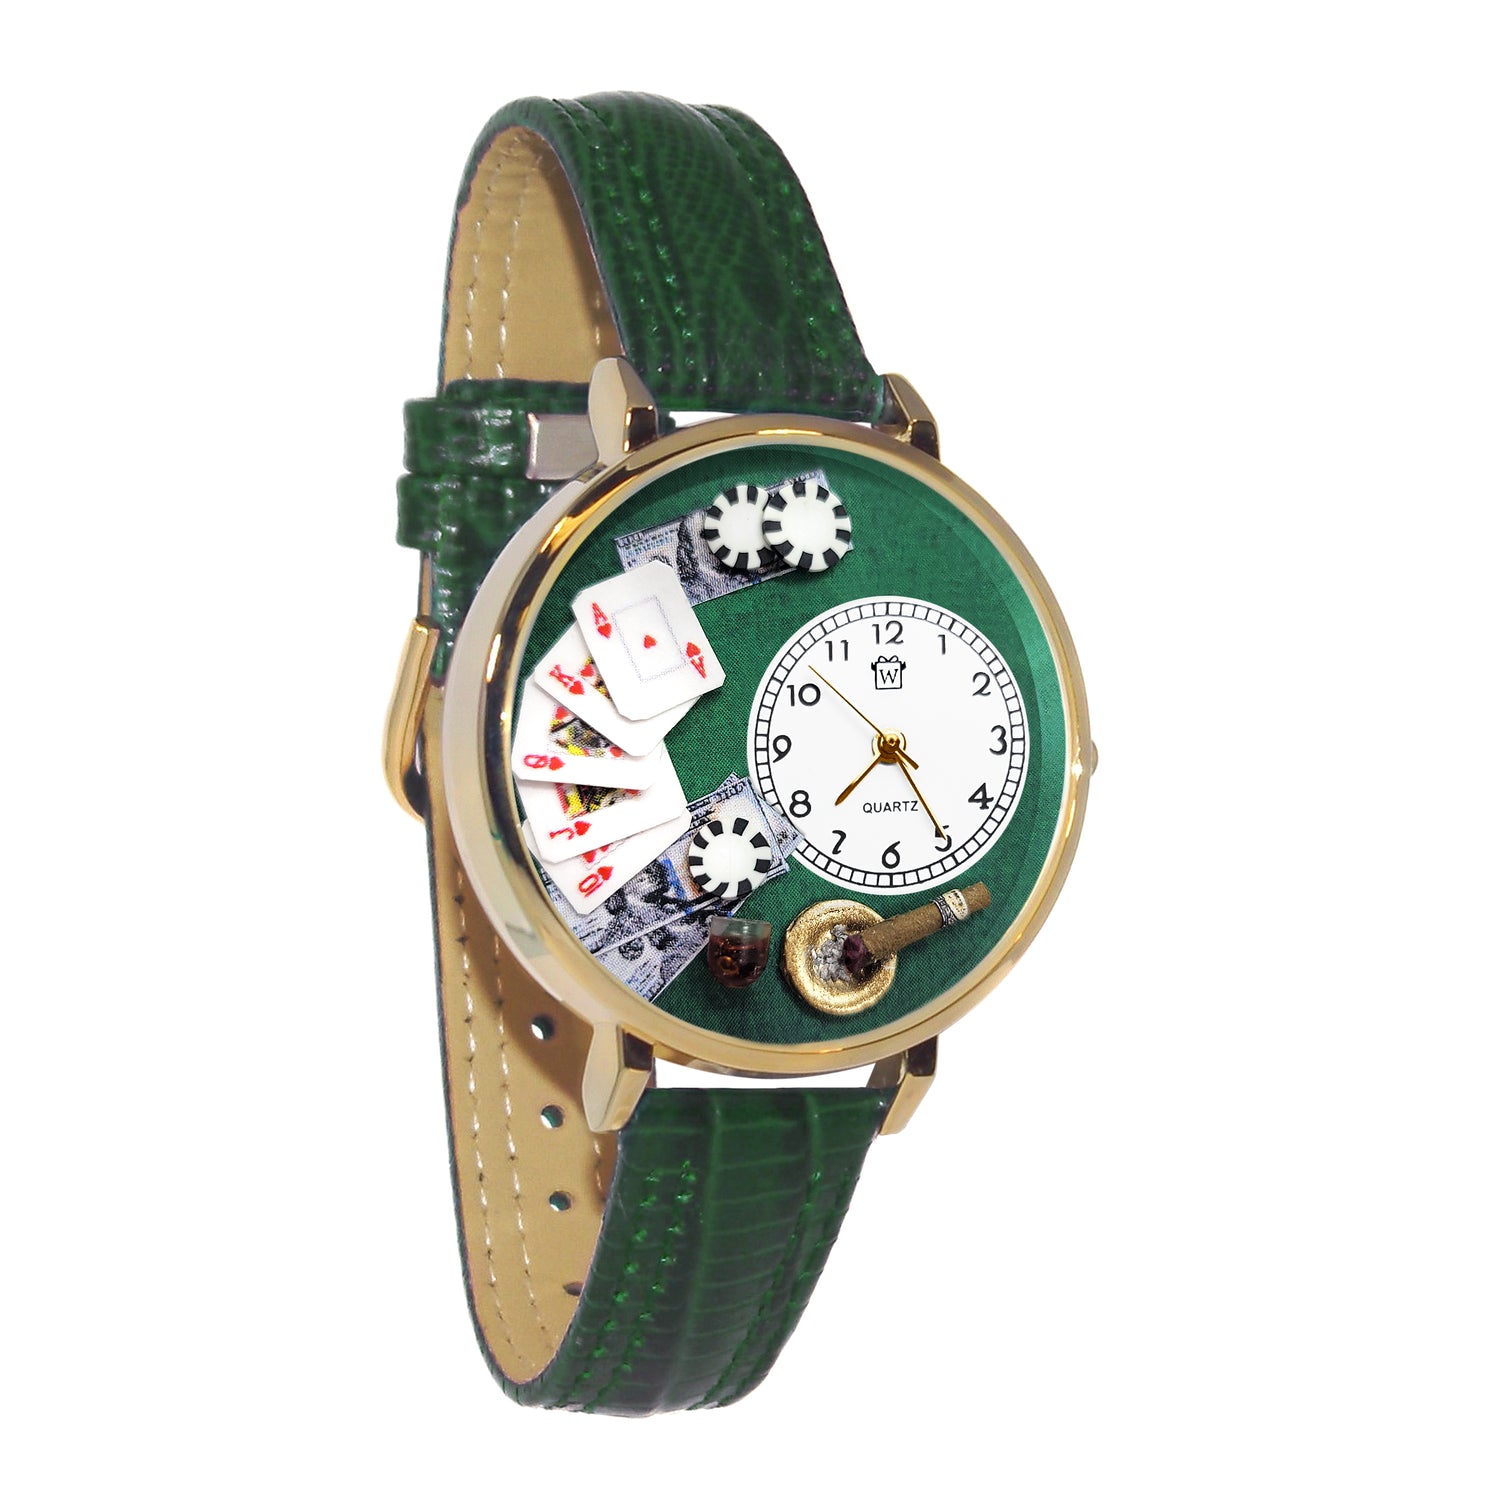 Whimsical Gifts | Poker 3D Watch Large Style | Handmade in USA | Hobbies & Special Interests | Casino & Gaming | Novelty Unique Fun Miniatures Gift | Gold Finish Green Leather Watch Band